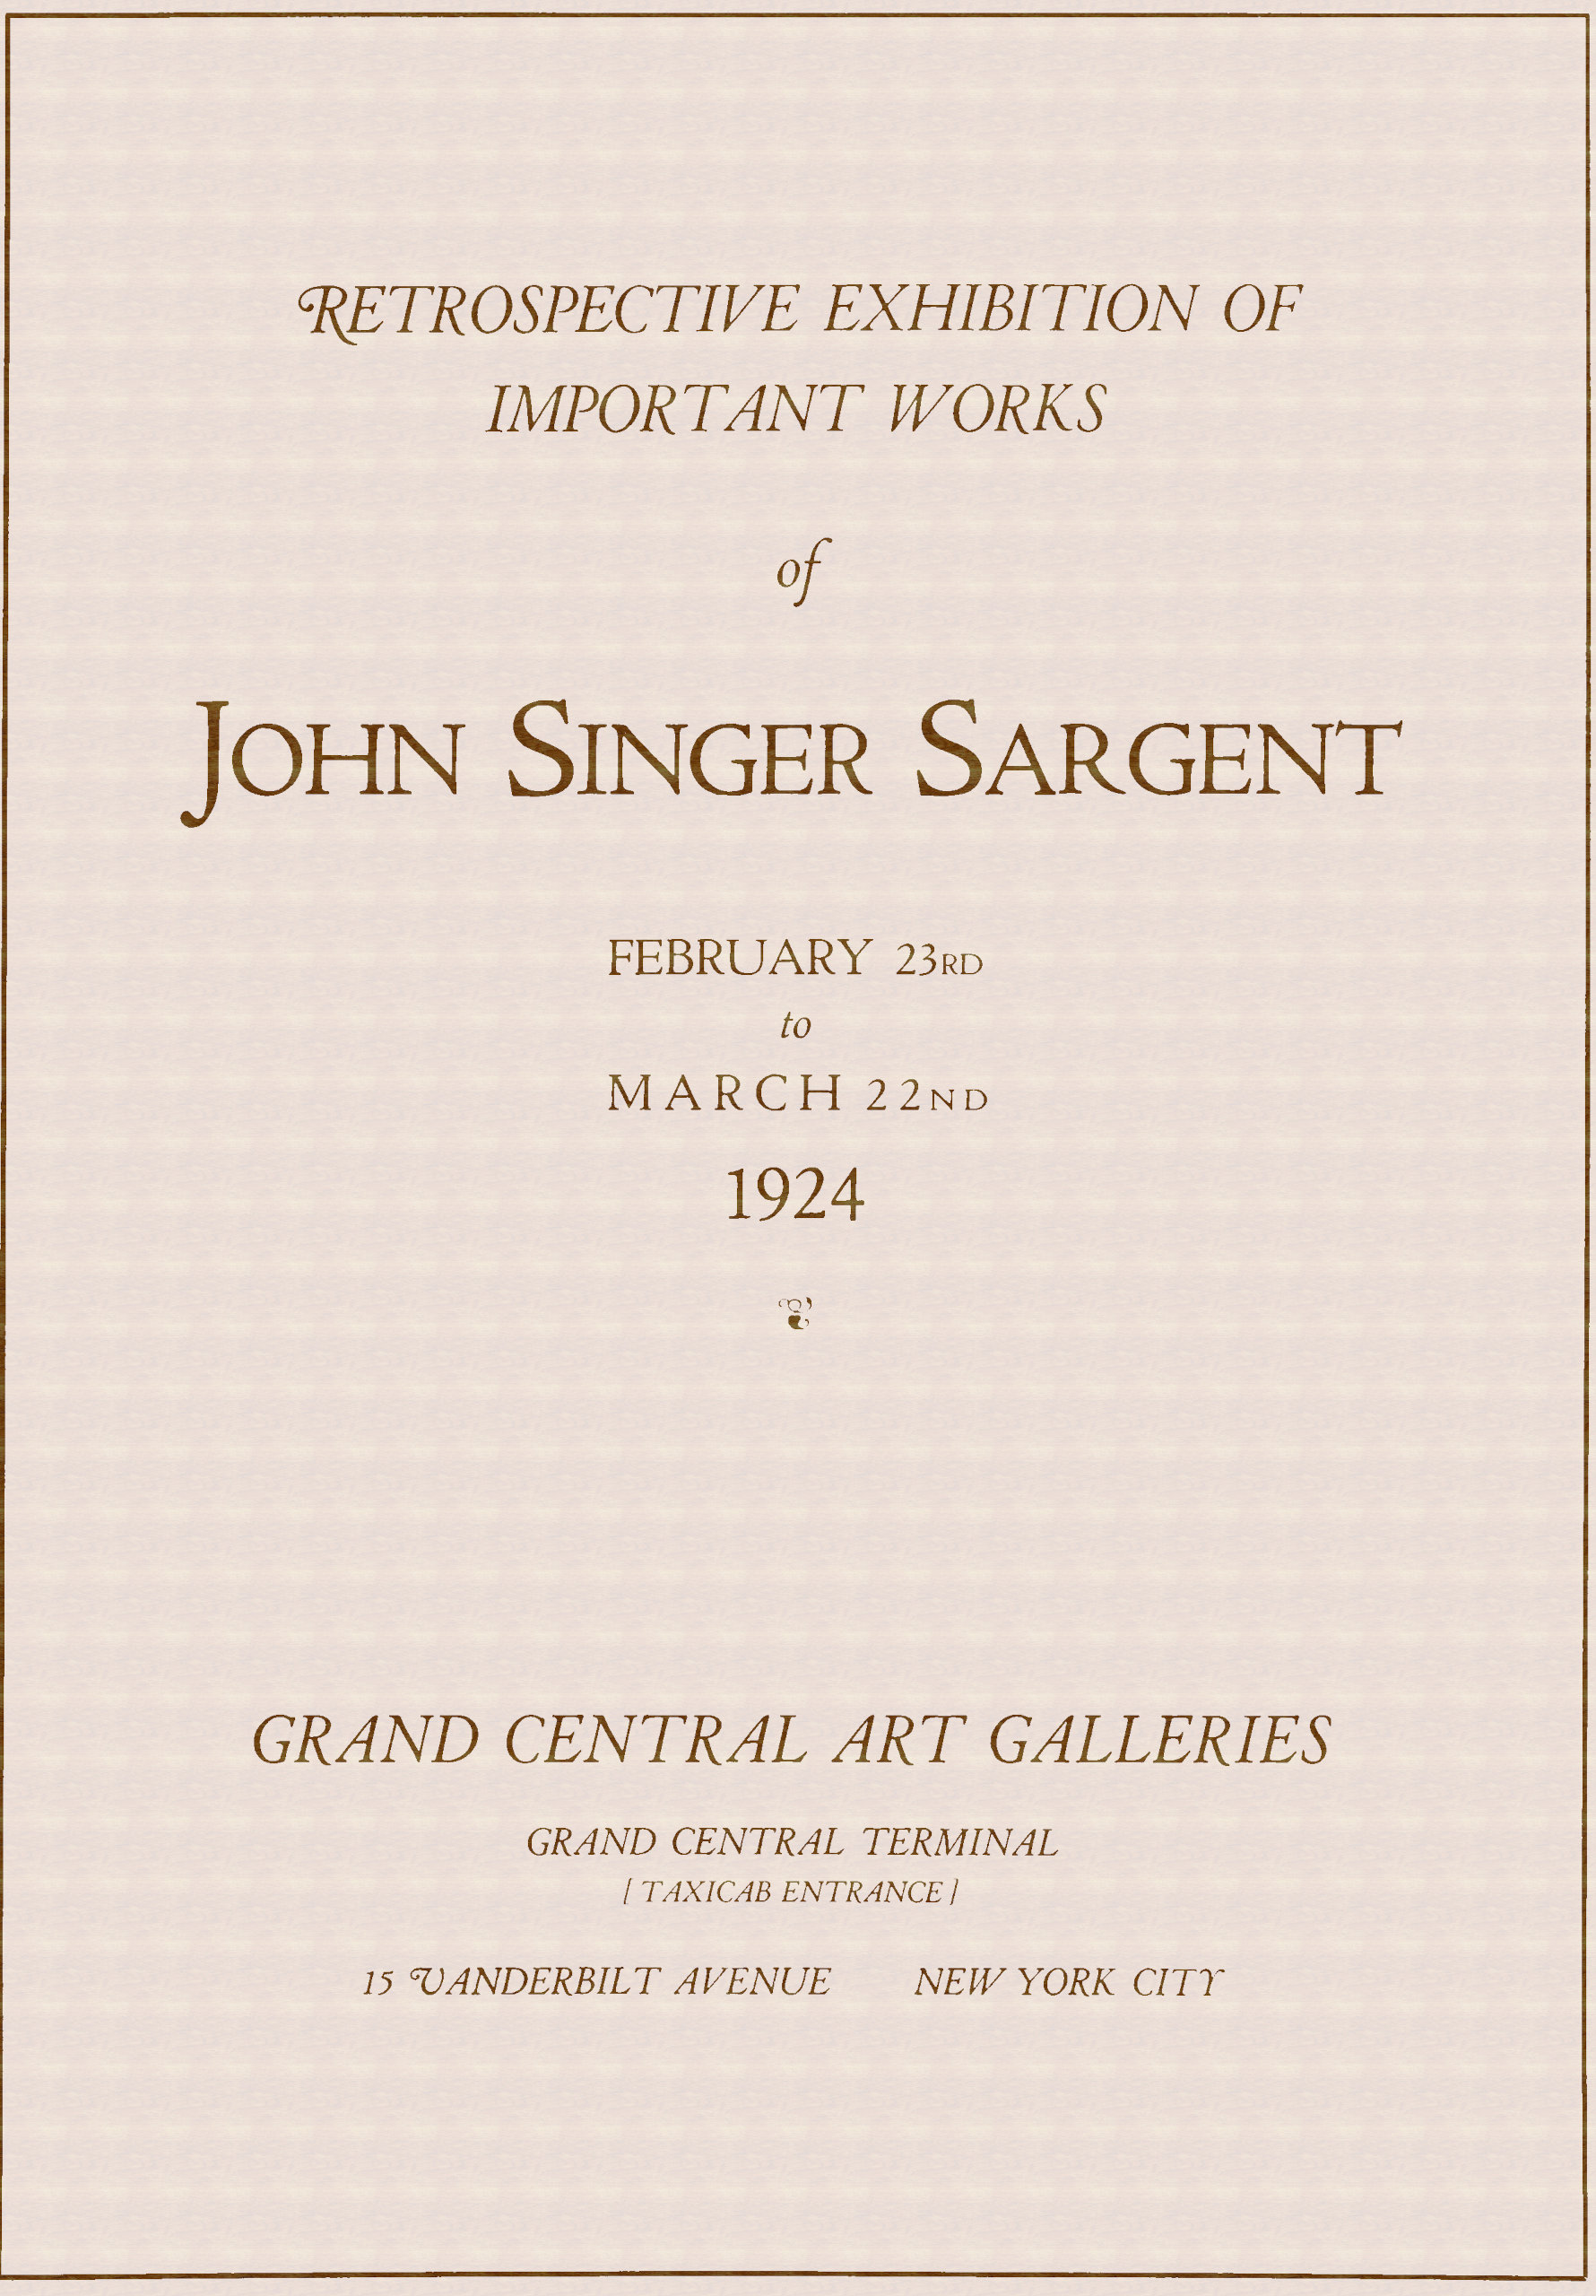 Retrospective exhibition of important works of John Singer Sargent, February 23rd to March 22nd, 1924